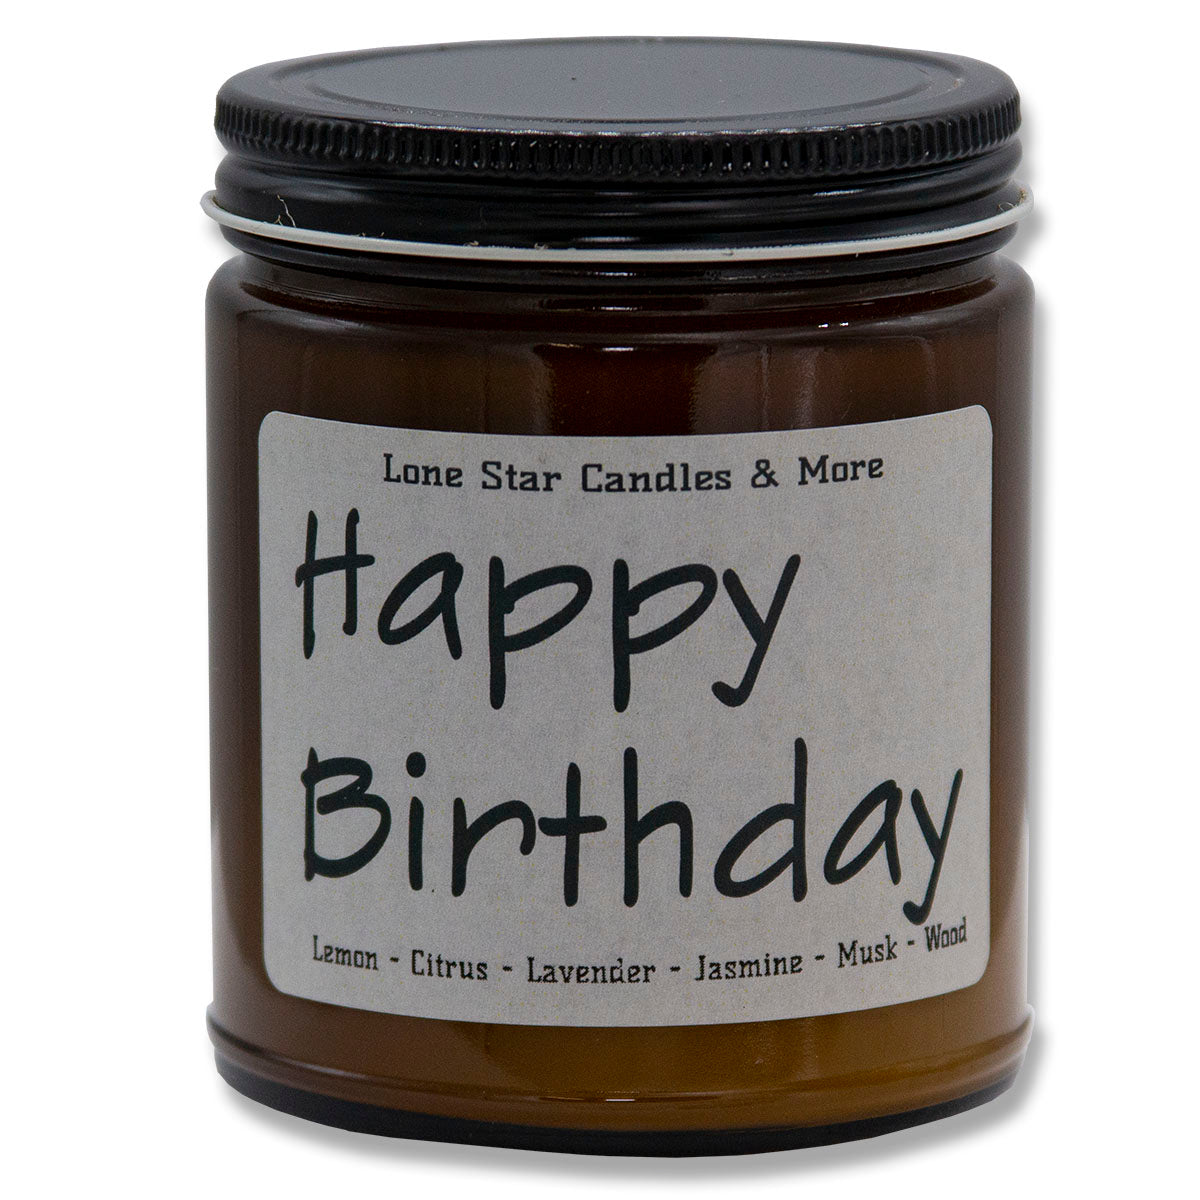 Icy Black, Lone Star Candles & More's Premium Hand Poured Strong Scented Soy Wax Gift Candle, A Uniquely Masculine and Earthy Blend, USA Made in Texas, Amber Glass Jars, 9oz Happy Birthday